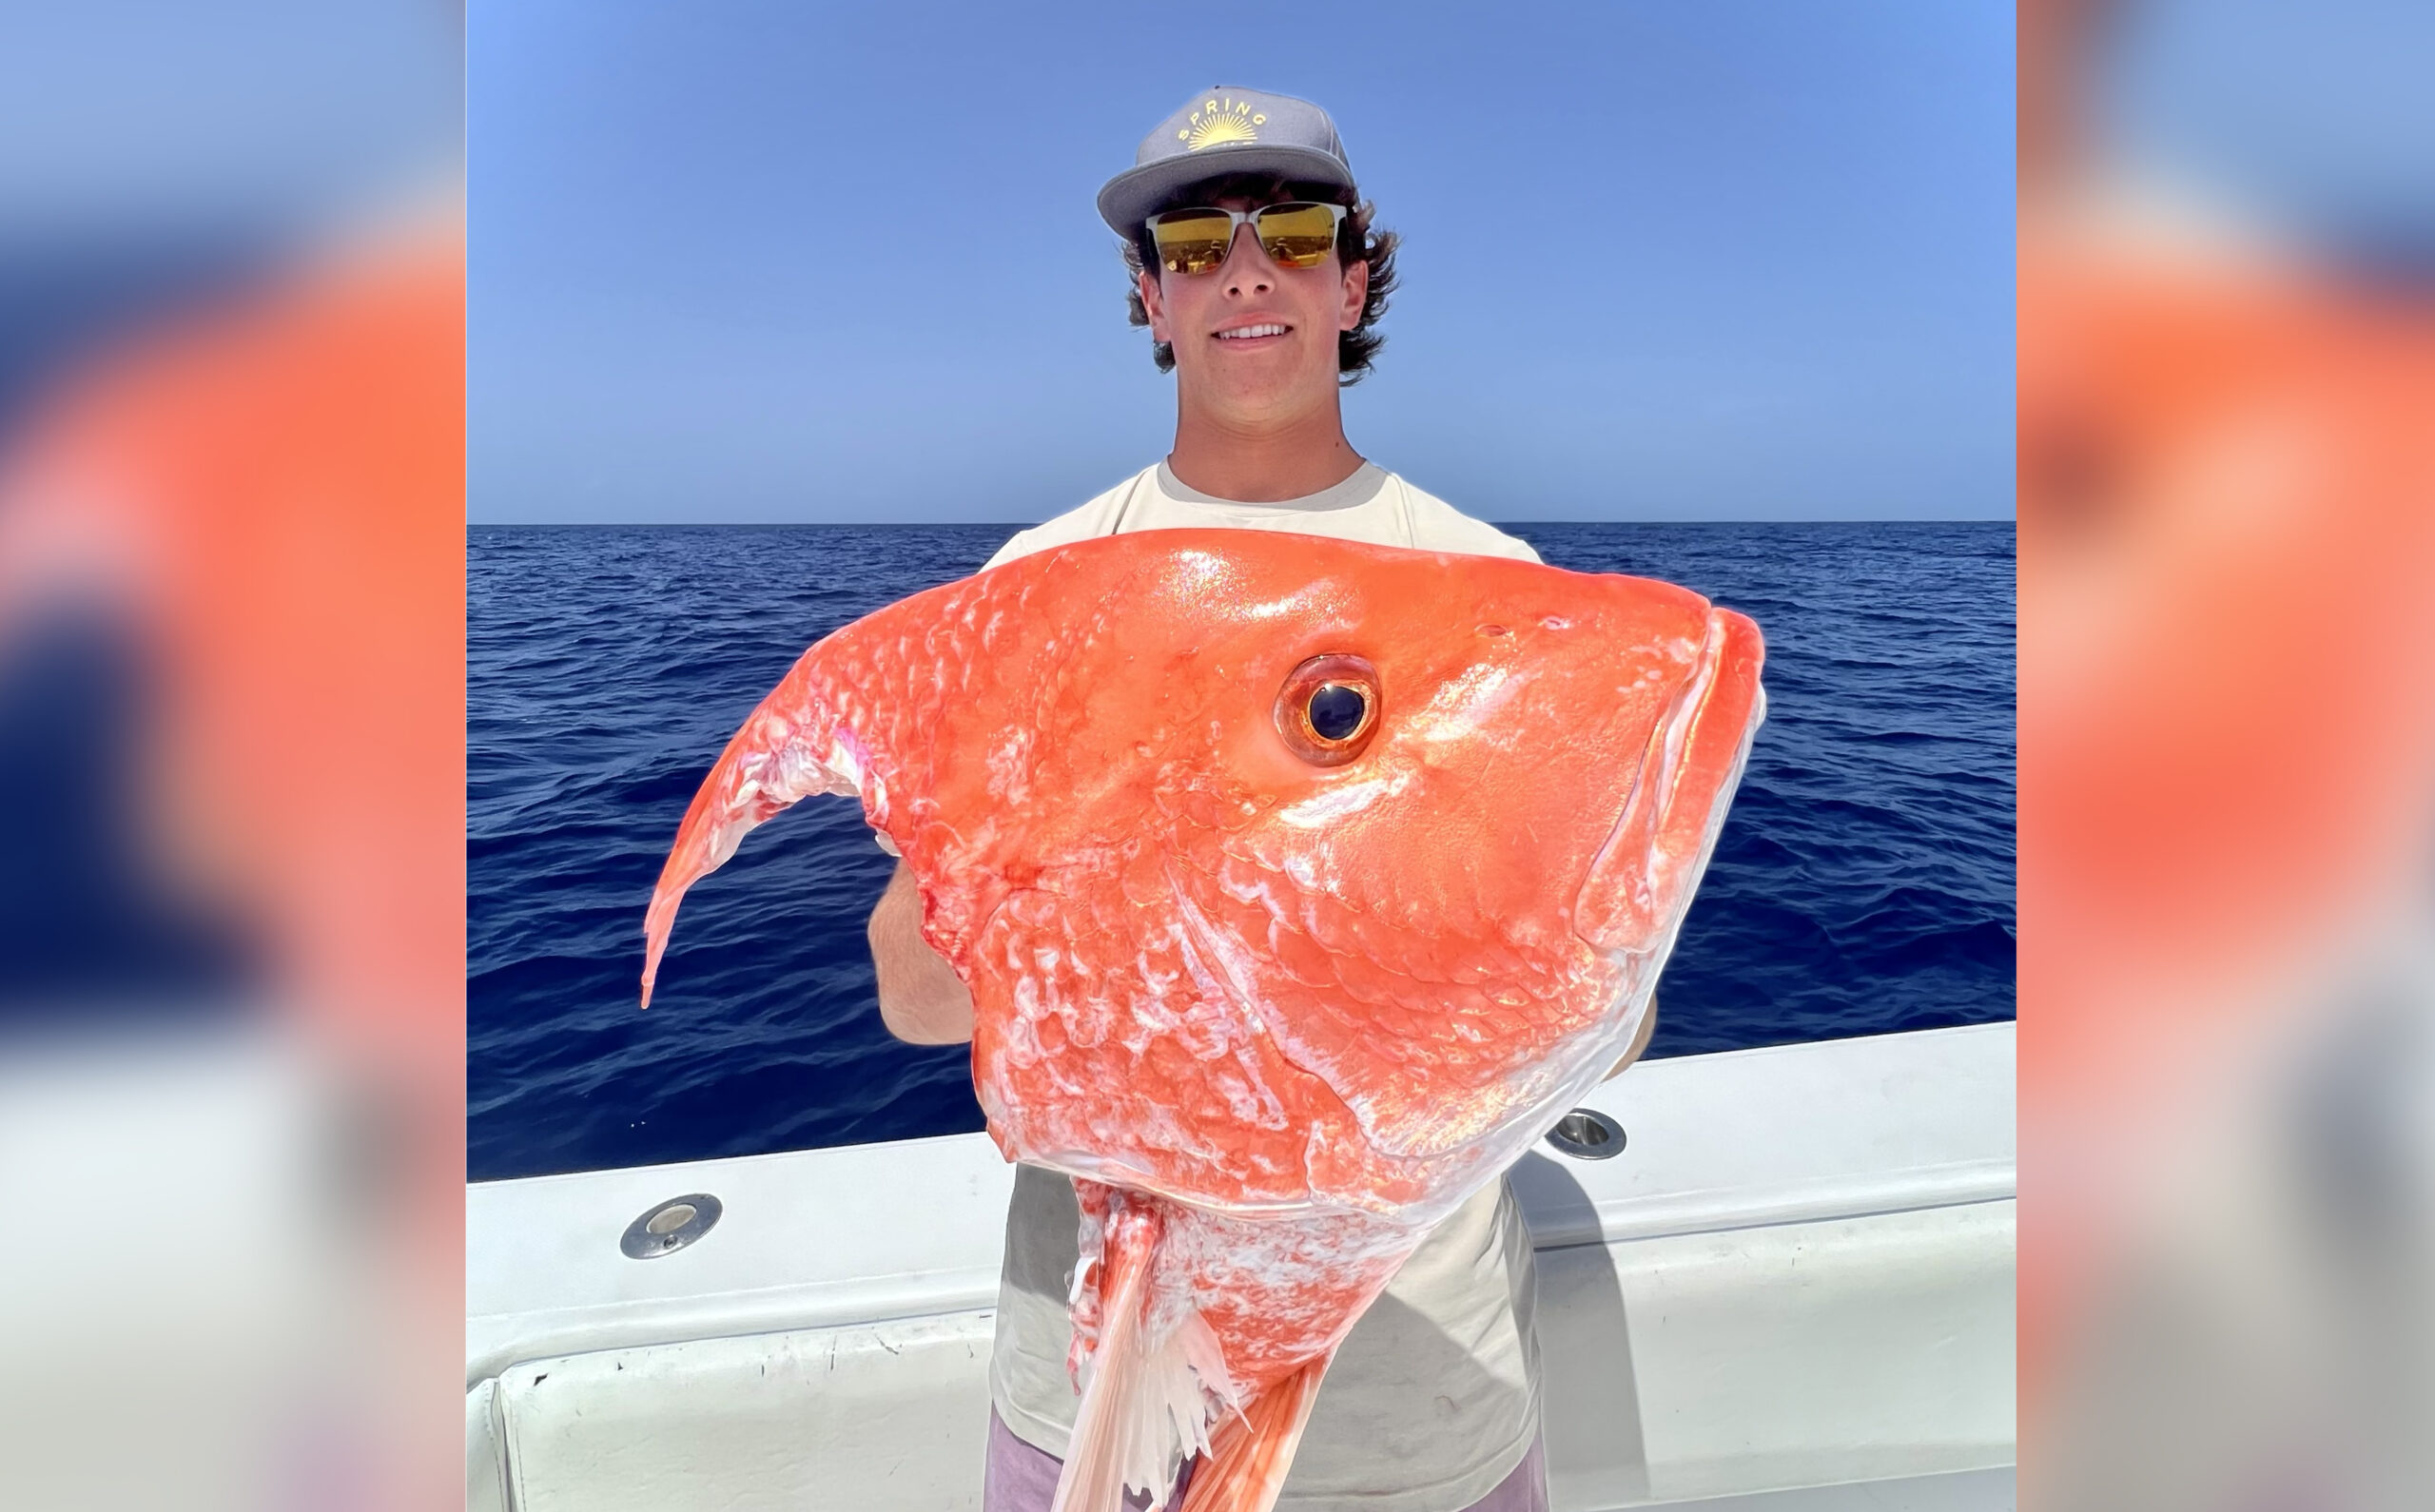 https://www.outdoorlife.com/wp-content/uploads/2023/09/28/world-record-snapper-scaled.jpg?w=2560